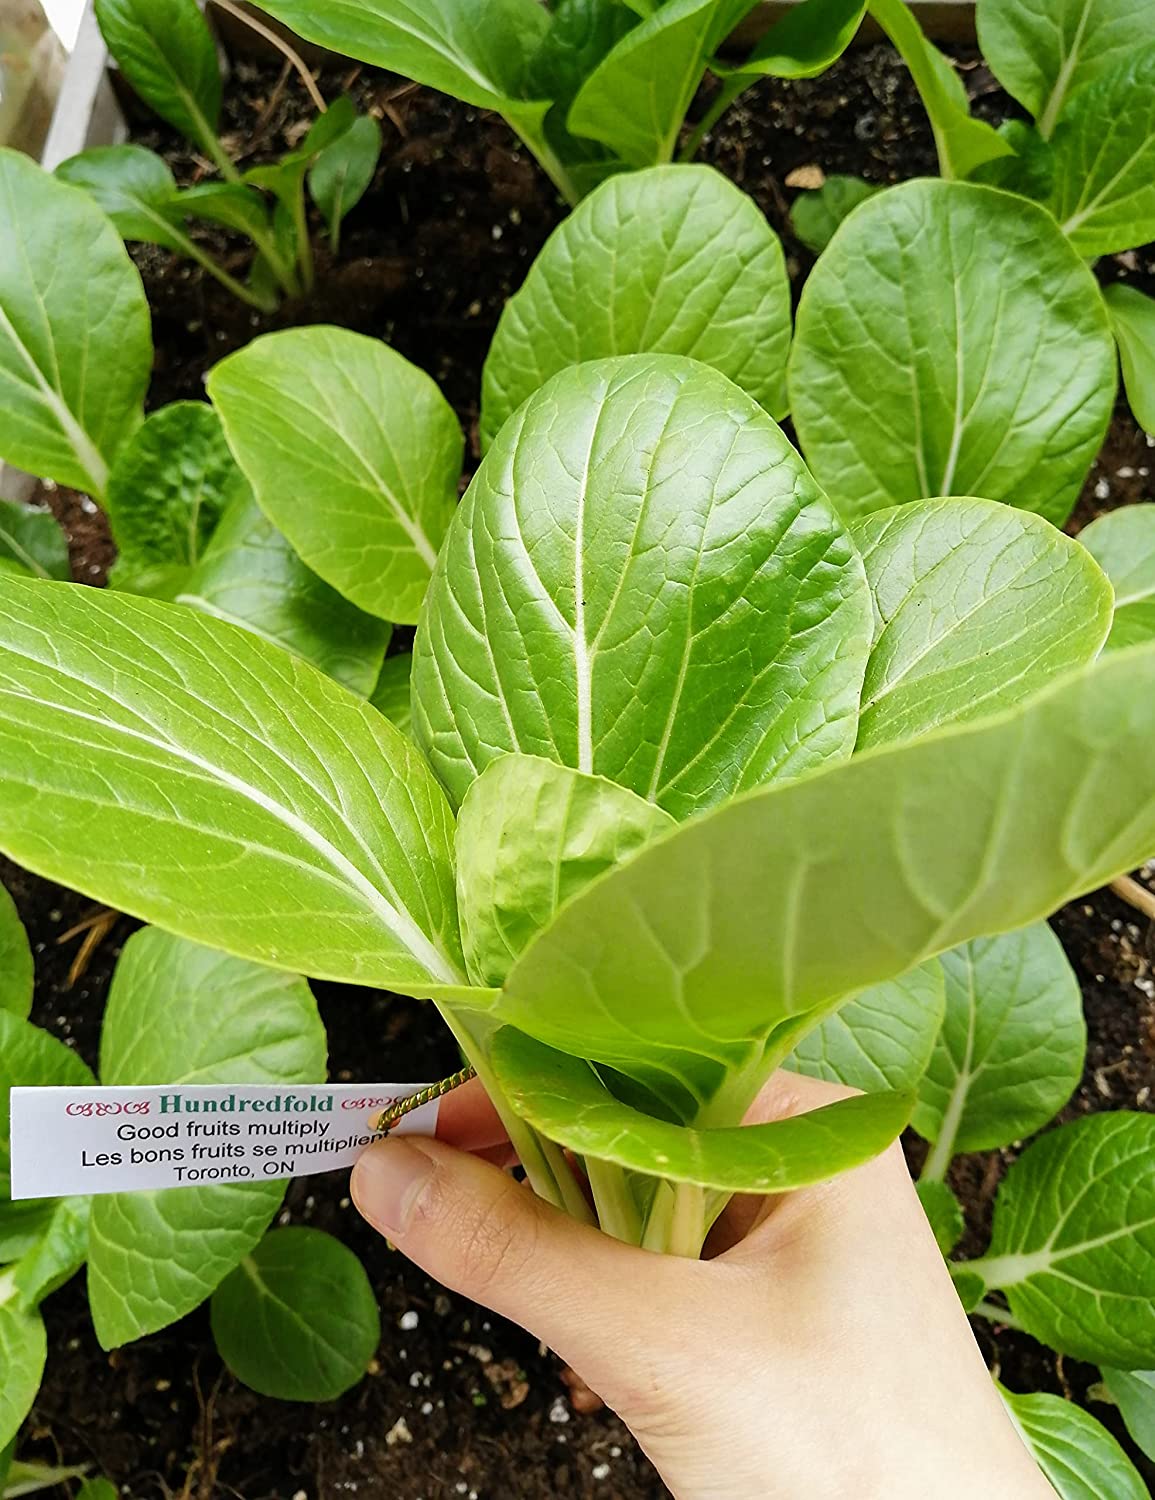 White Stem Pak Choi 500 Seeds - Brassica rapa Non-GMO Pac Choi, Bok Choy, Baicai Asian Greens, Fast-Growing Vegetable, Great for Babyleaf and Mircogreen in Salad Mixes